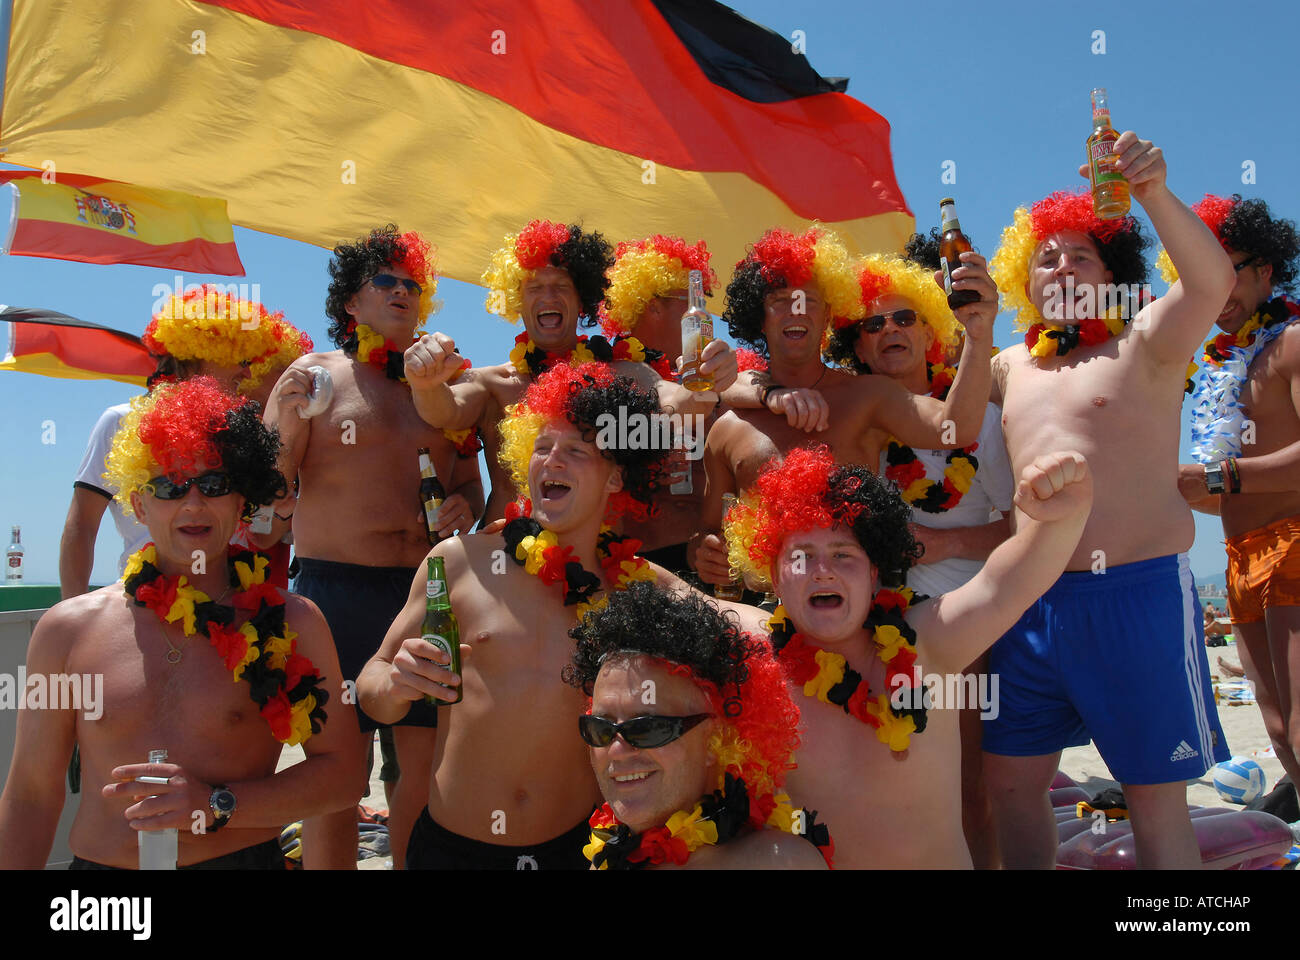 German football fans cheering for their team during the 2006 FIFA World Cup, Majorca, Spain Stock Photo